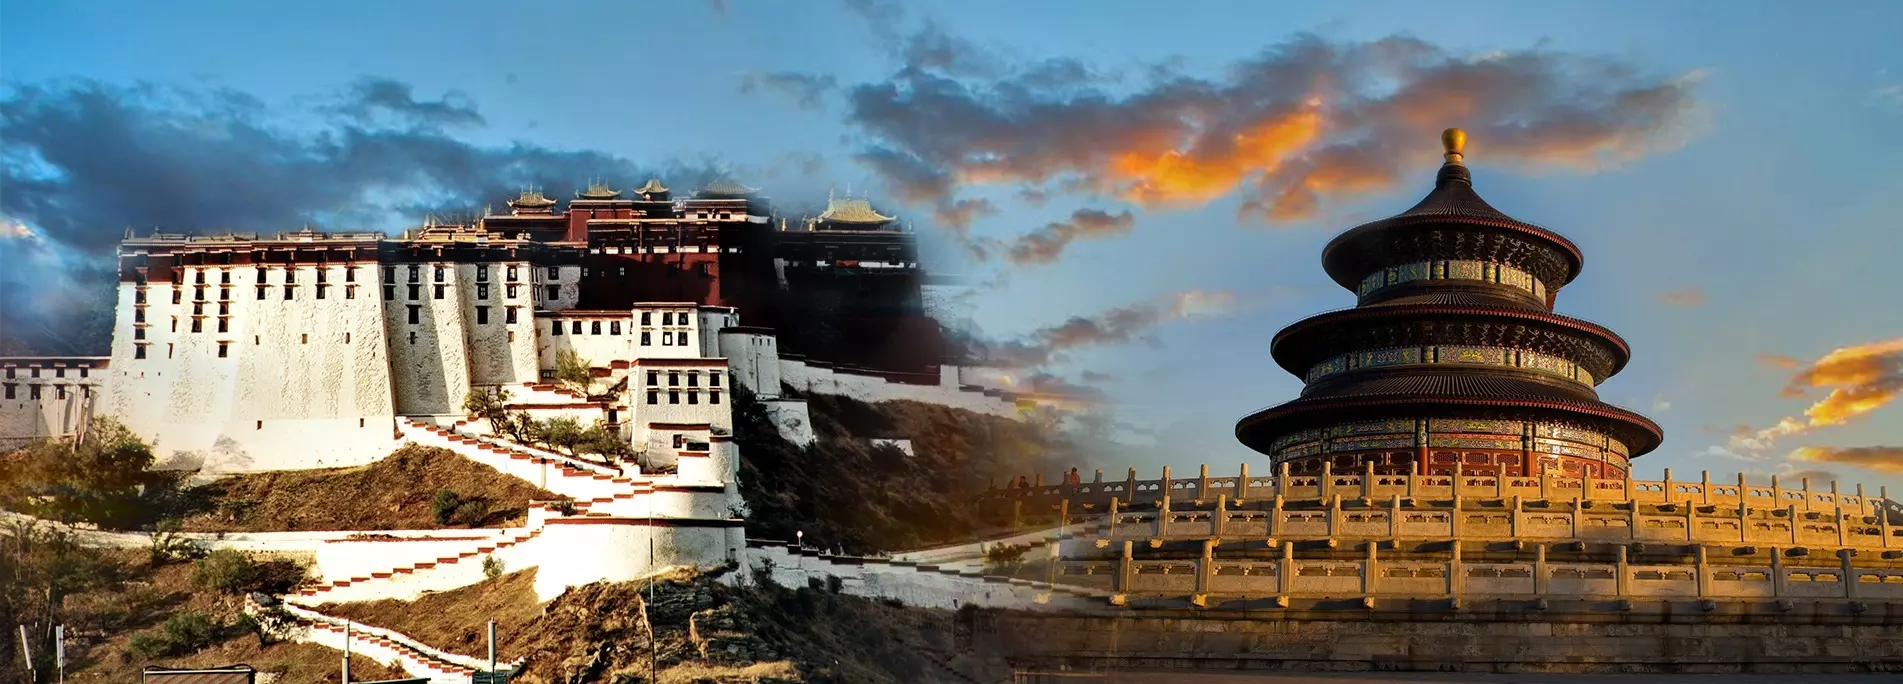 You will visit the landmarks in both Beijing and Tibet via Beijing and Tibet tour packages.